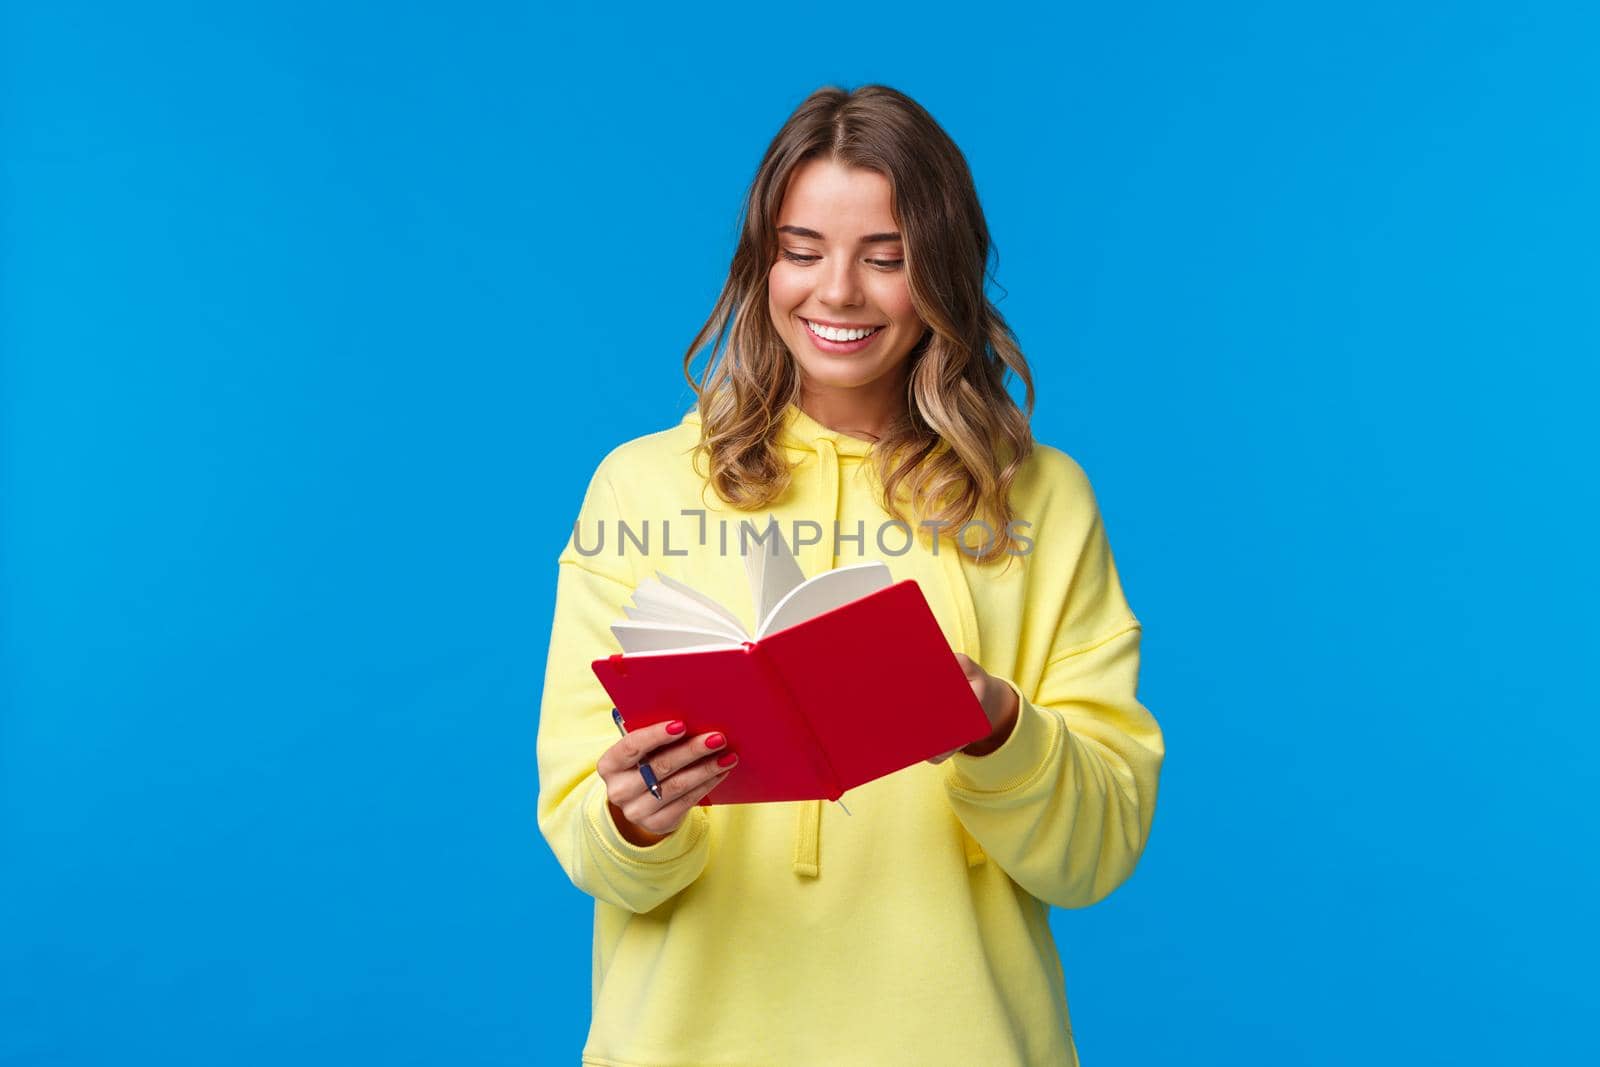 Girl bought new planner, writing down notes or lecture, smiling joyfully, holding red notebook, decide start secret diary, standing in yellow hoodie over blue background.